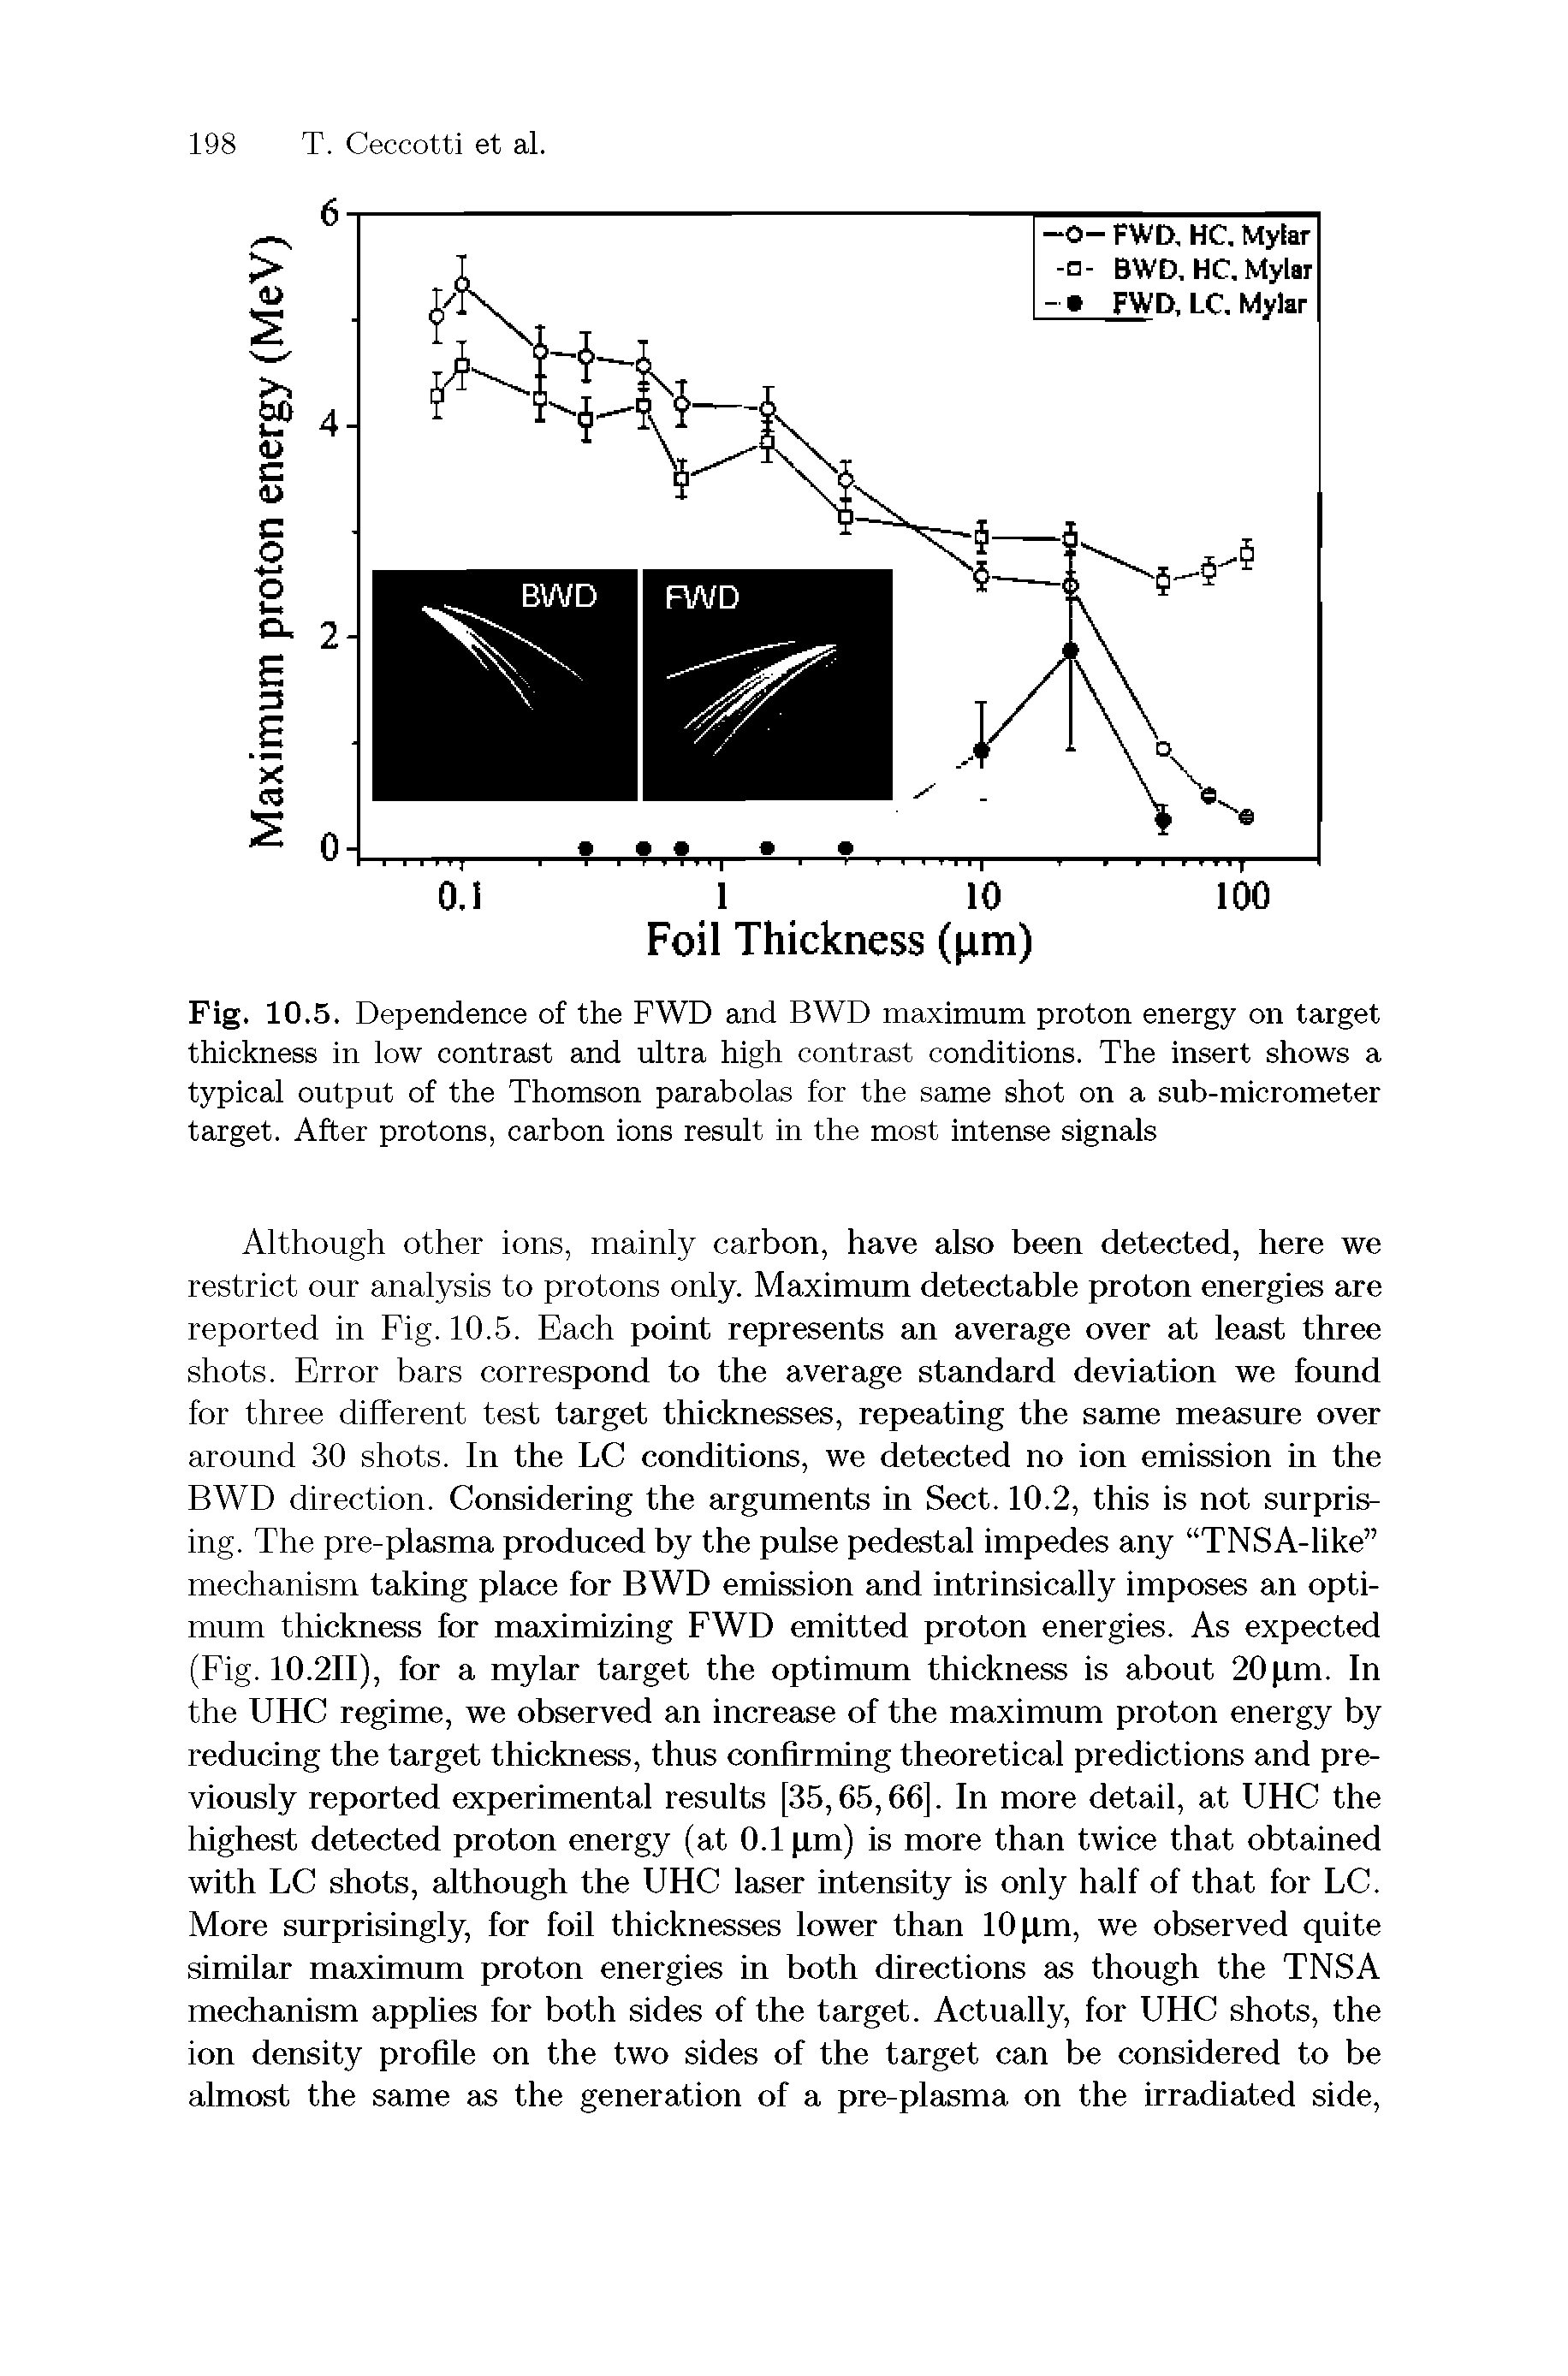 Fig. 10.5. Dependence of the FWD and BWD maximum proton energy on target thickness in low contrast and ultra high contrast conditions. The insert shows a typical output of the Thomson parabolas for the same shot on a sub-micrometer target. After protons, carbon ions result in the most intense signals...